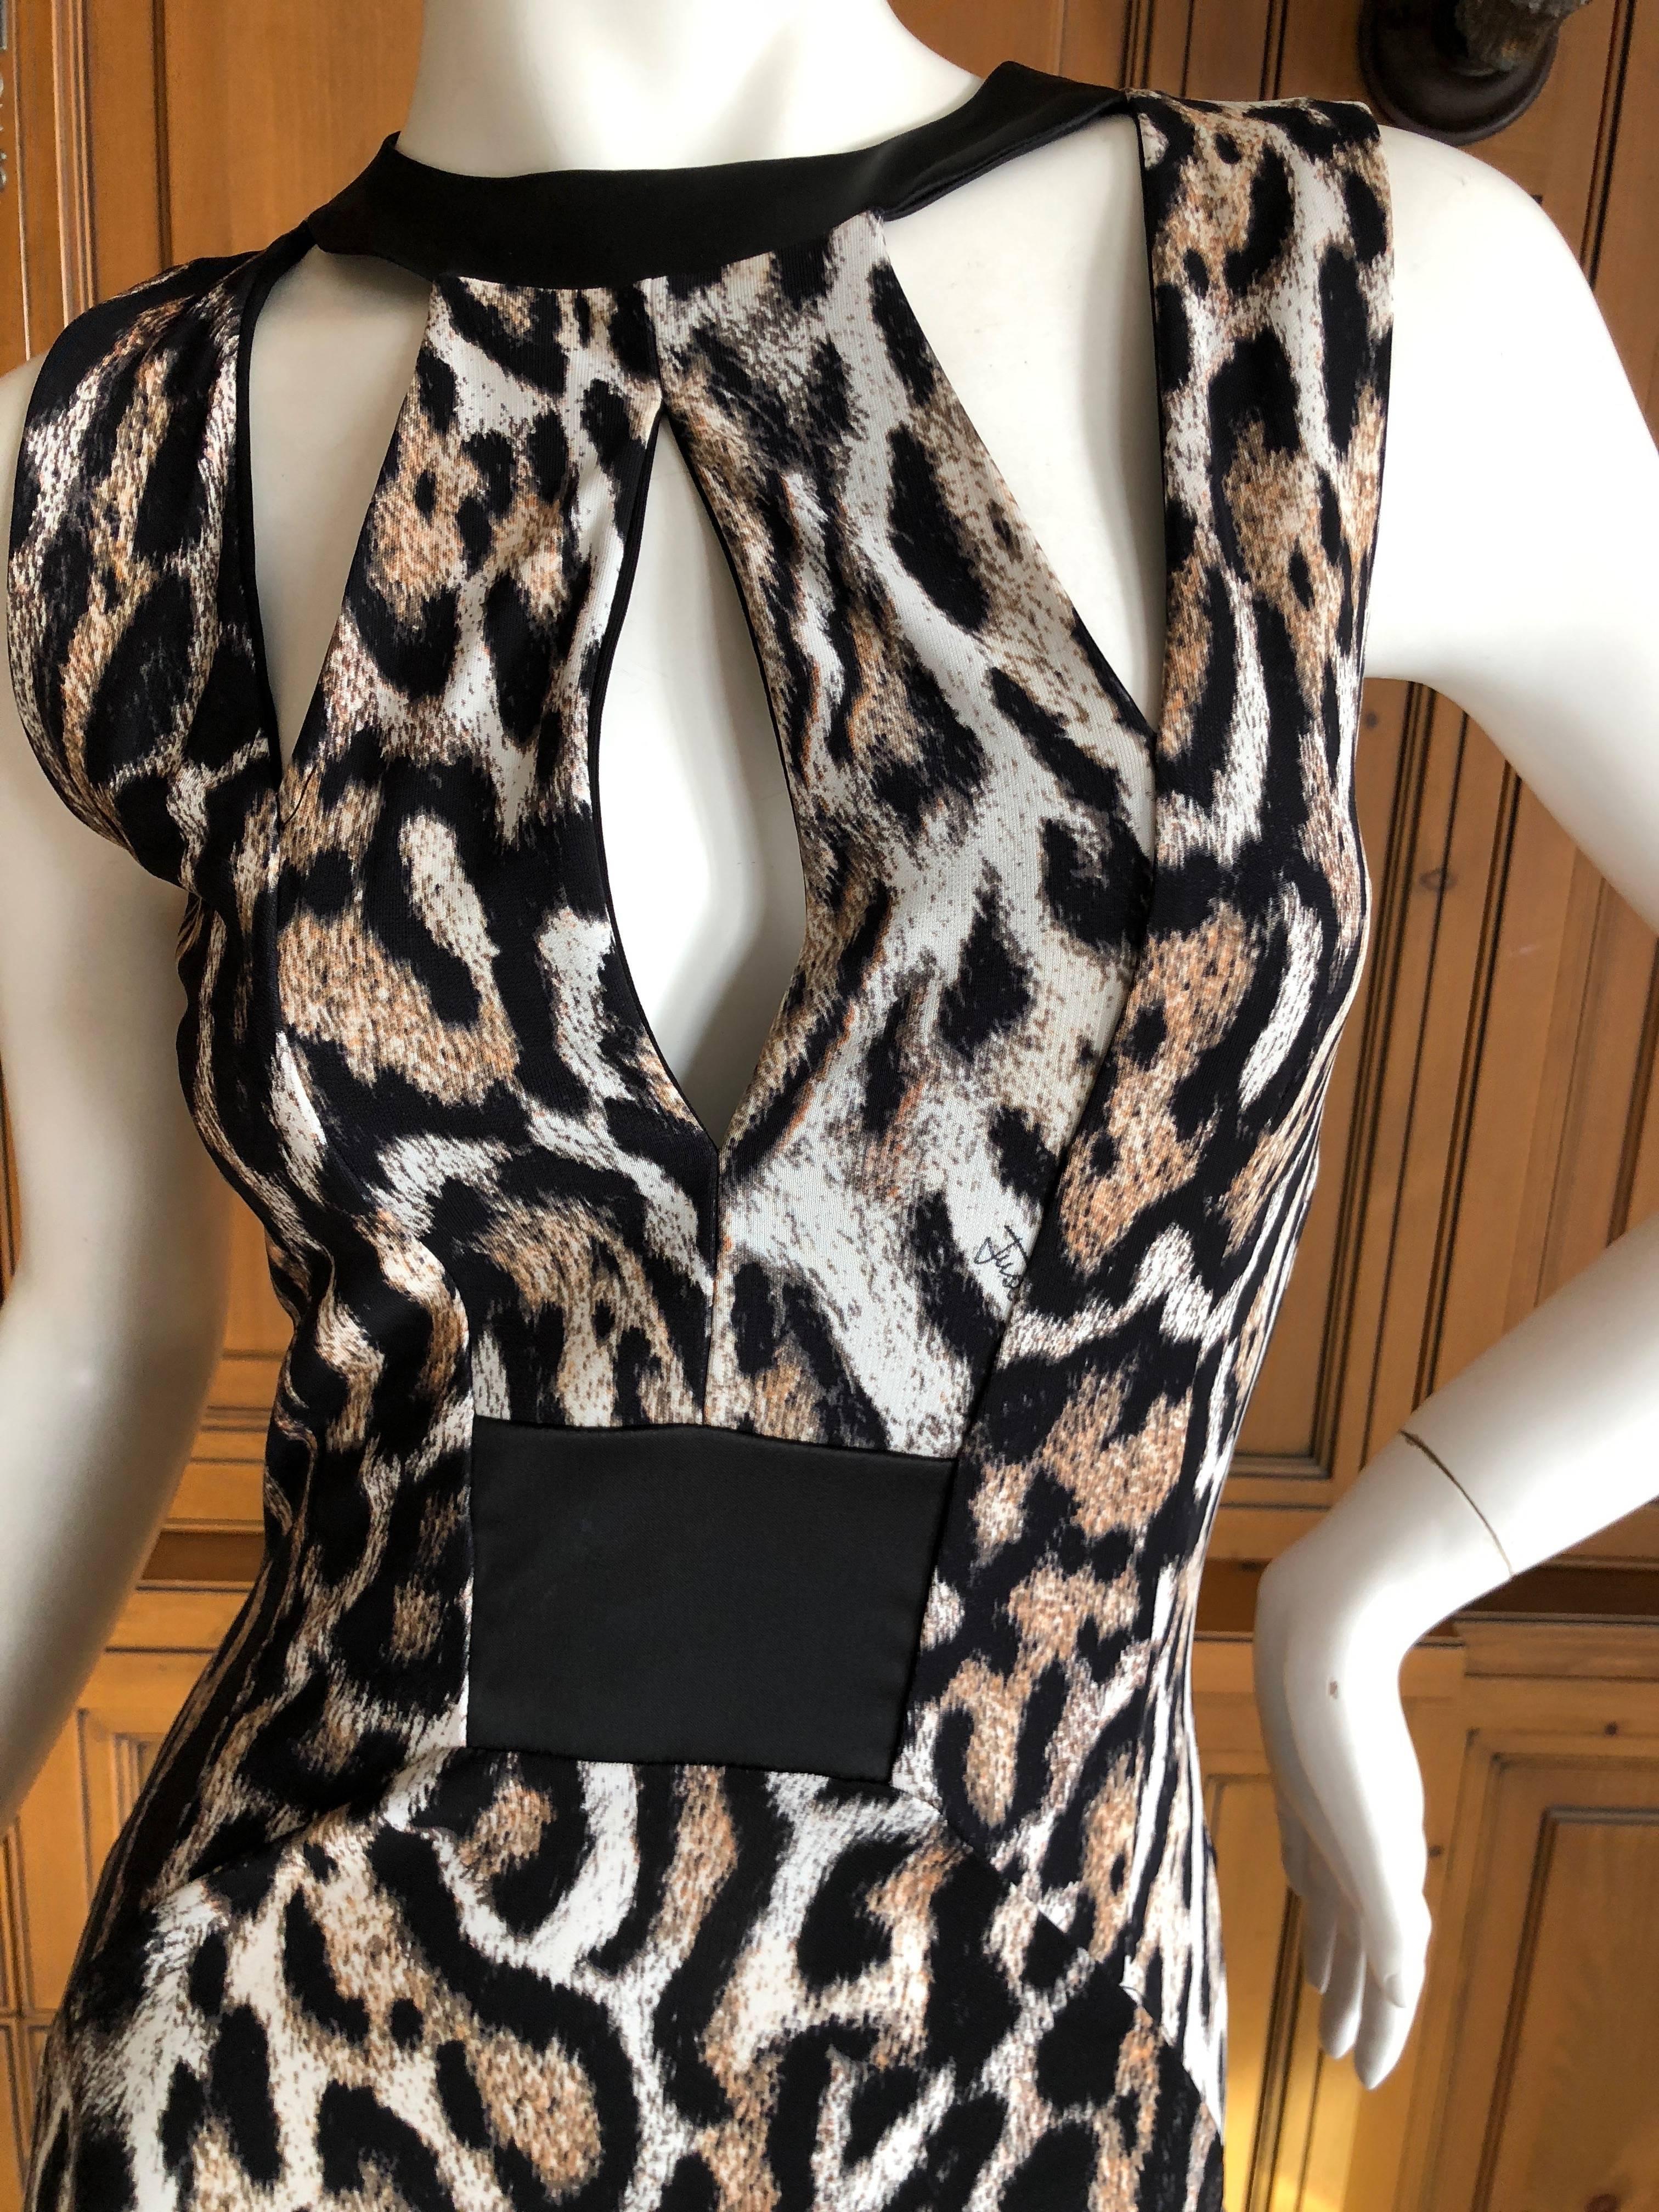 Roberto Cavalli Long Leopard Dress with Cut Outs for Just Cavalli

Small

Bust 36